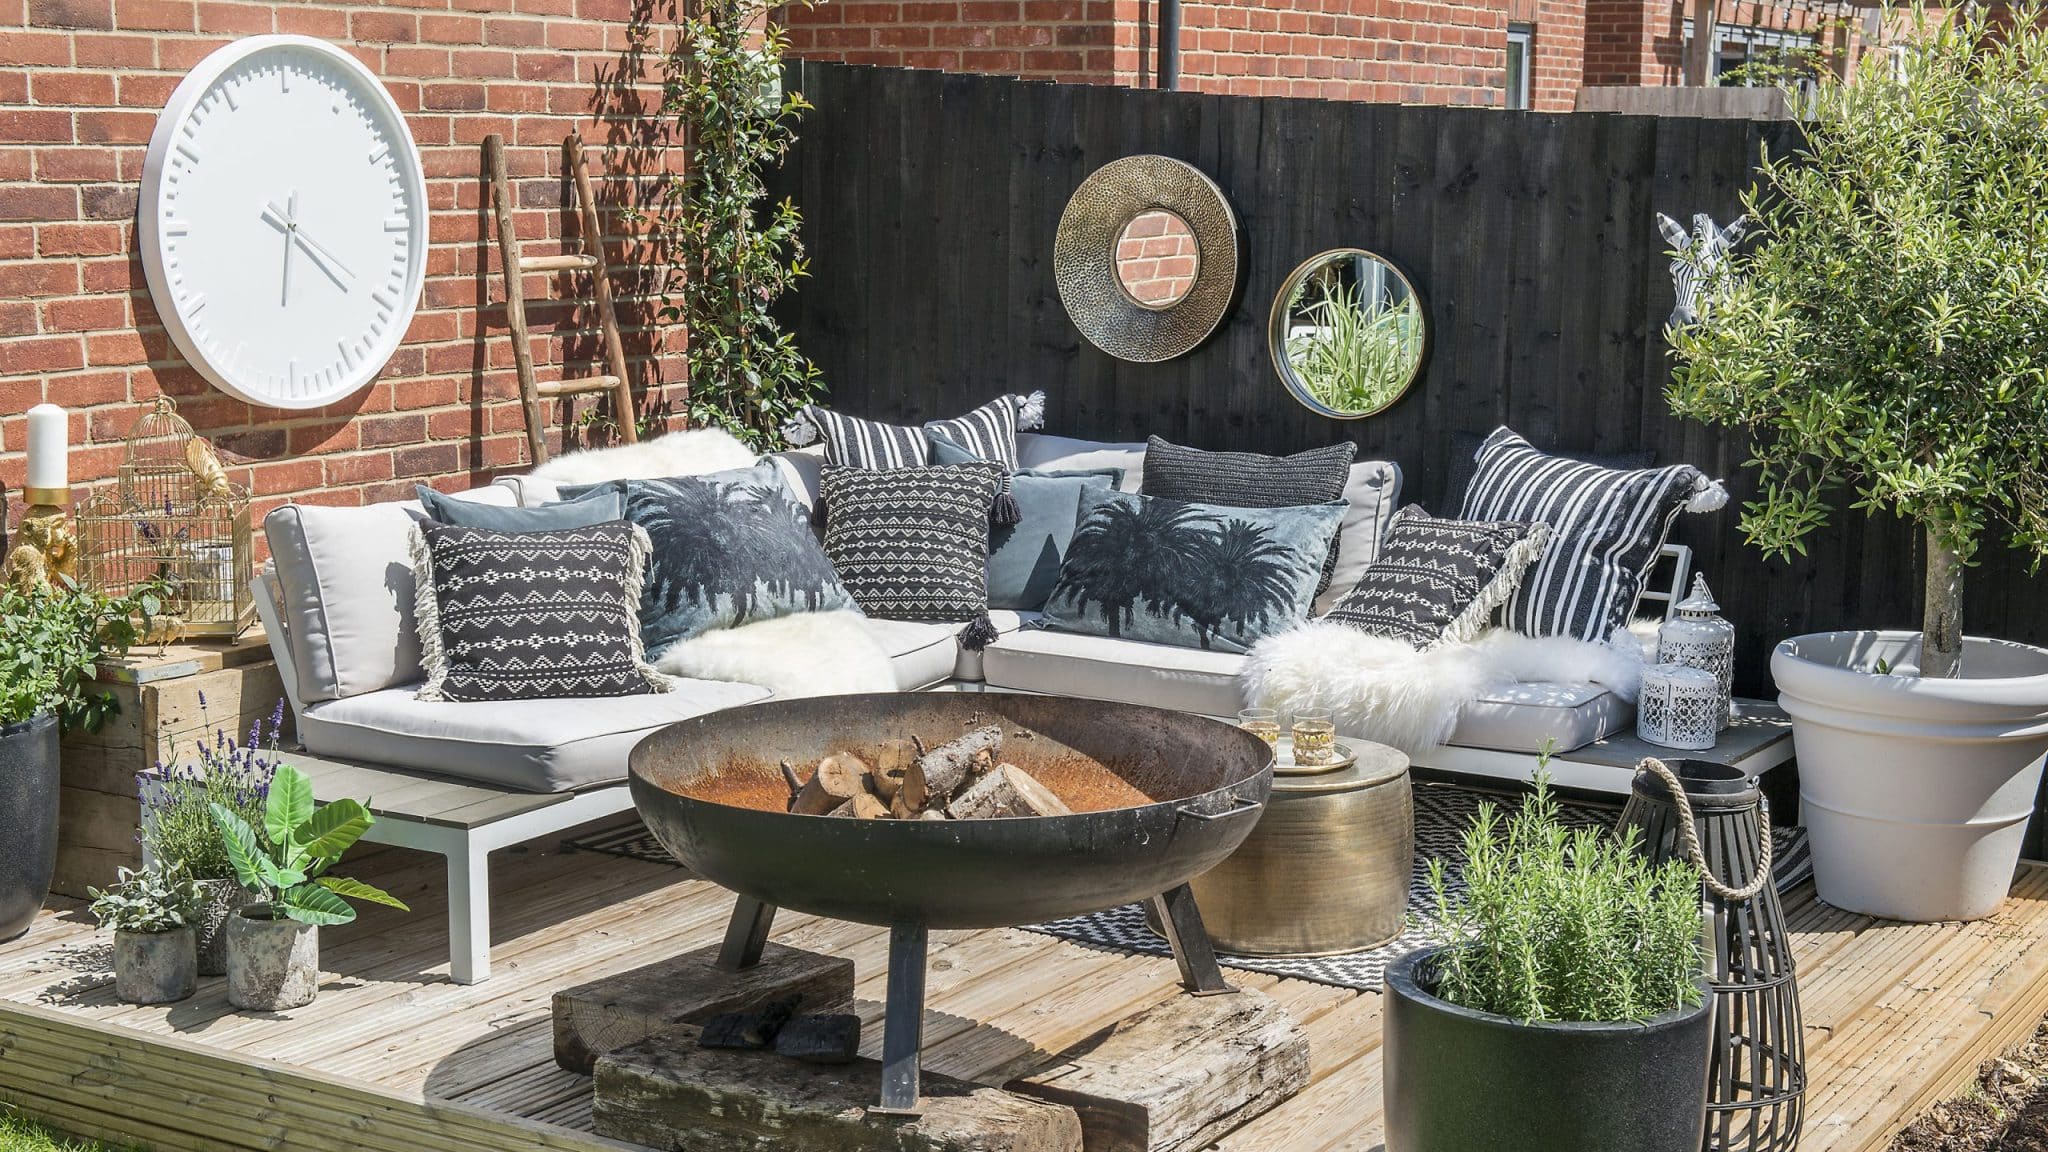 Outdoor Décor Ideas to Spruce Up Your Garden Using Spray Paint